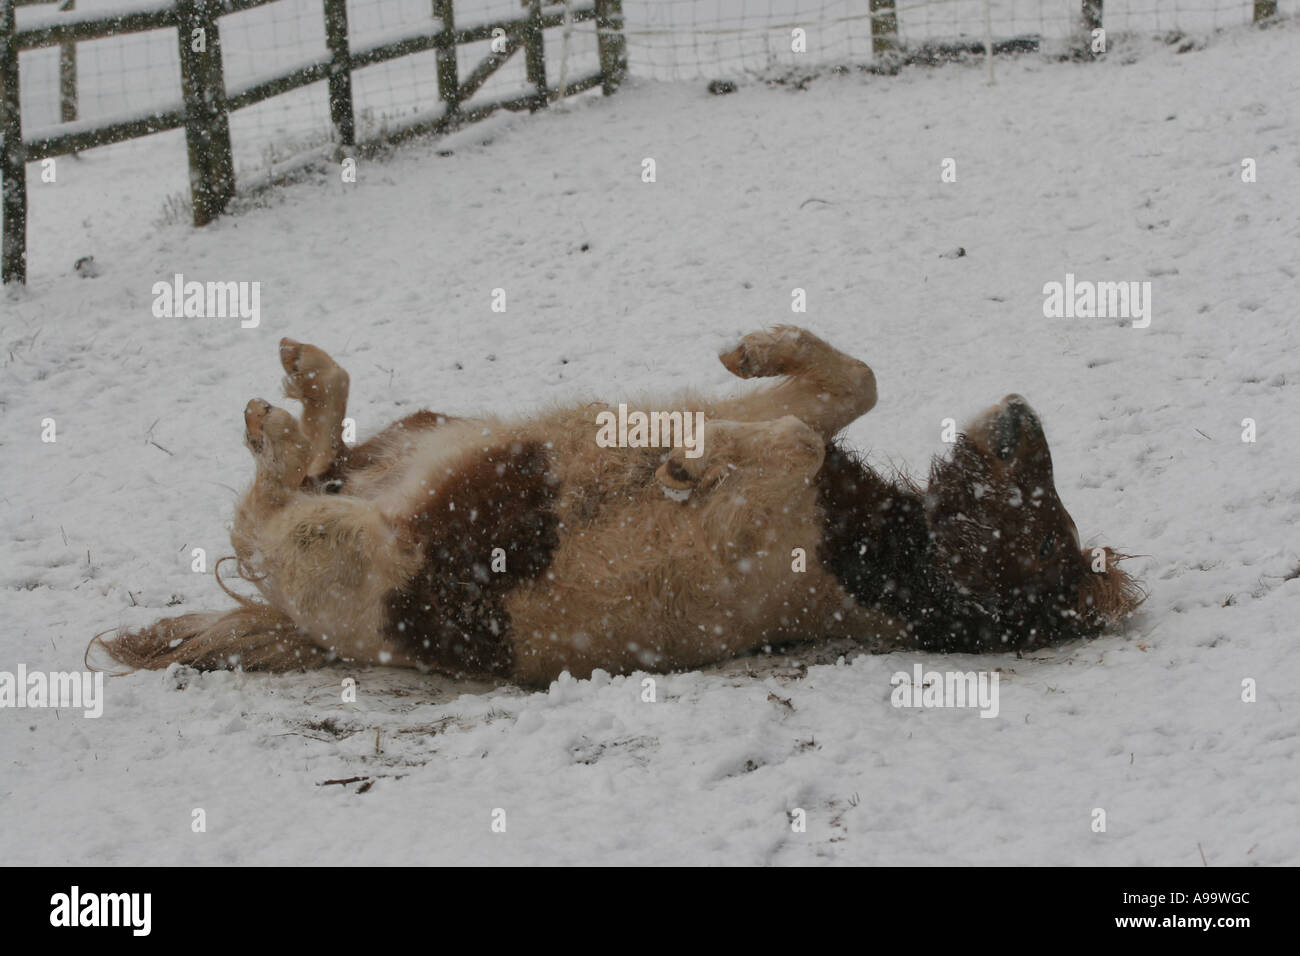 Miniature Horse in Snow Animal Natural World Environment Wales Stock Photo